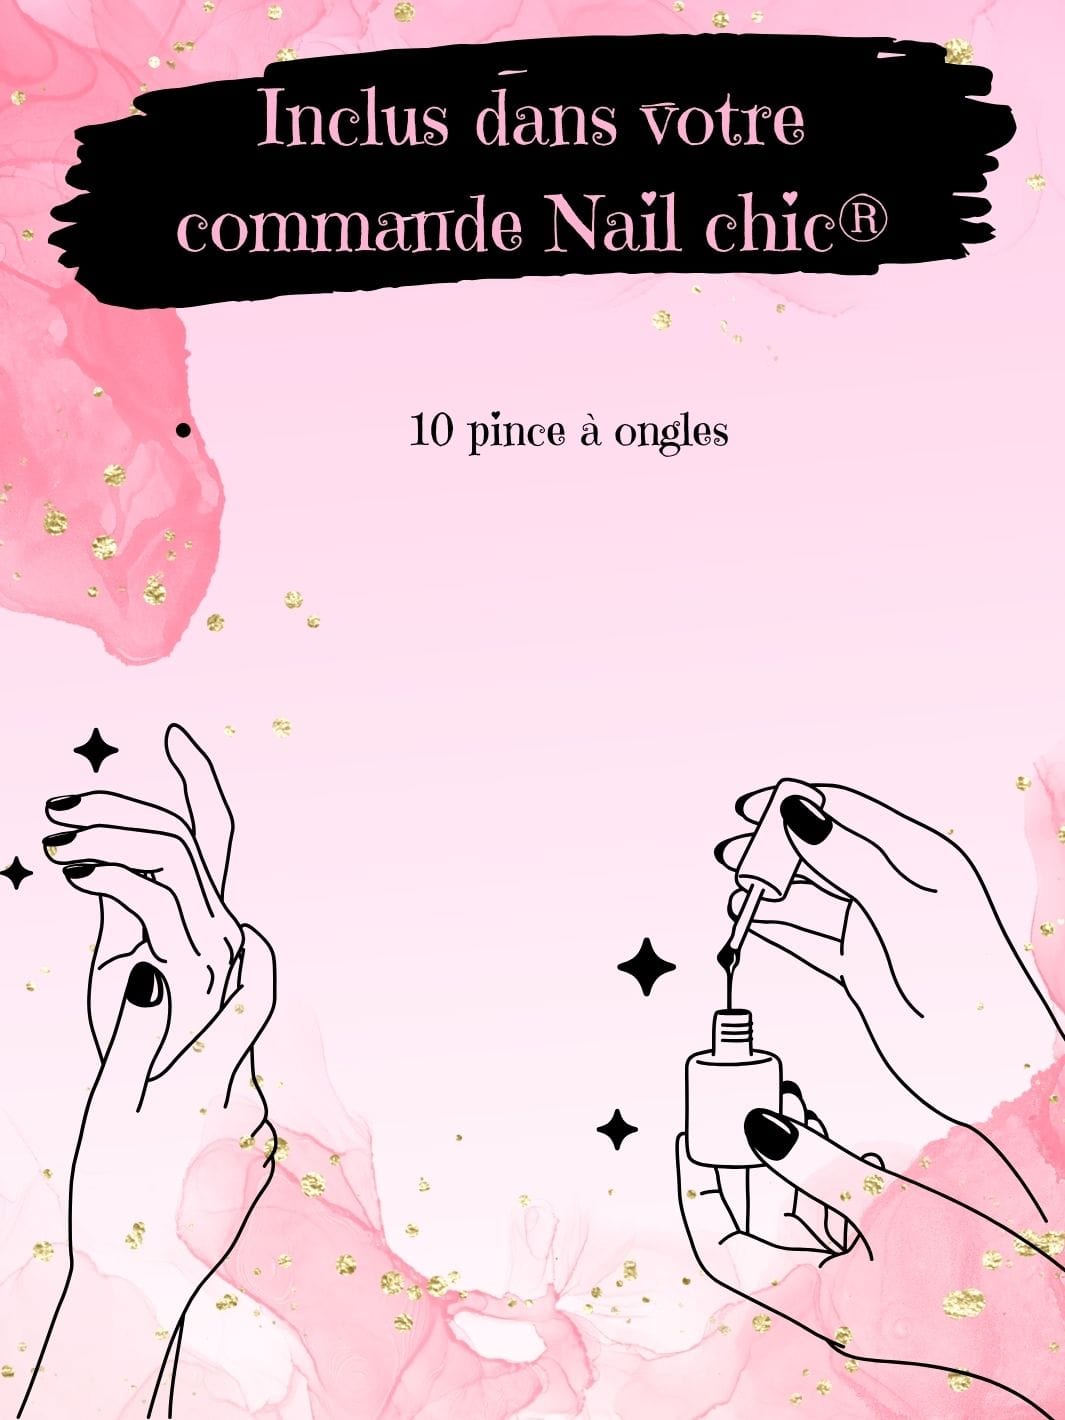 Meillere pince a ongles Nail Chic